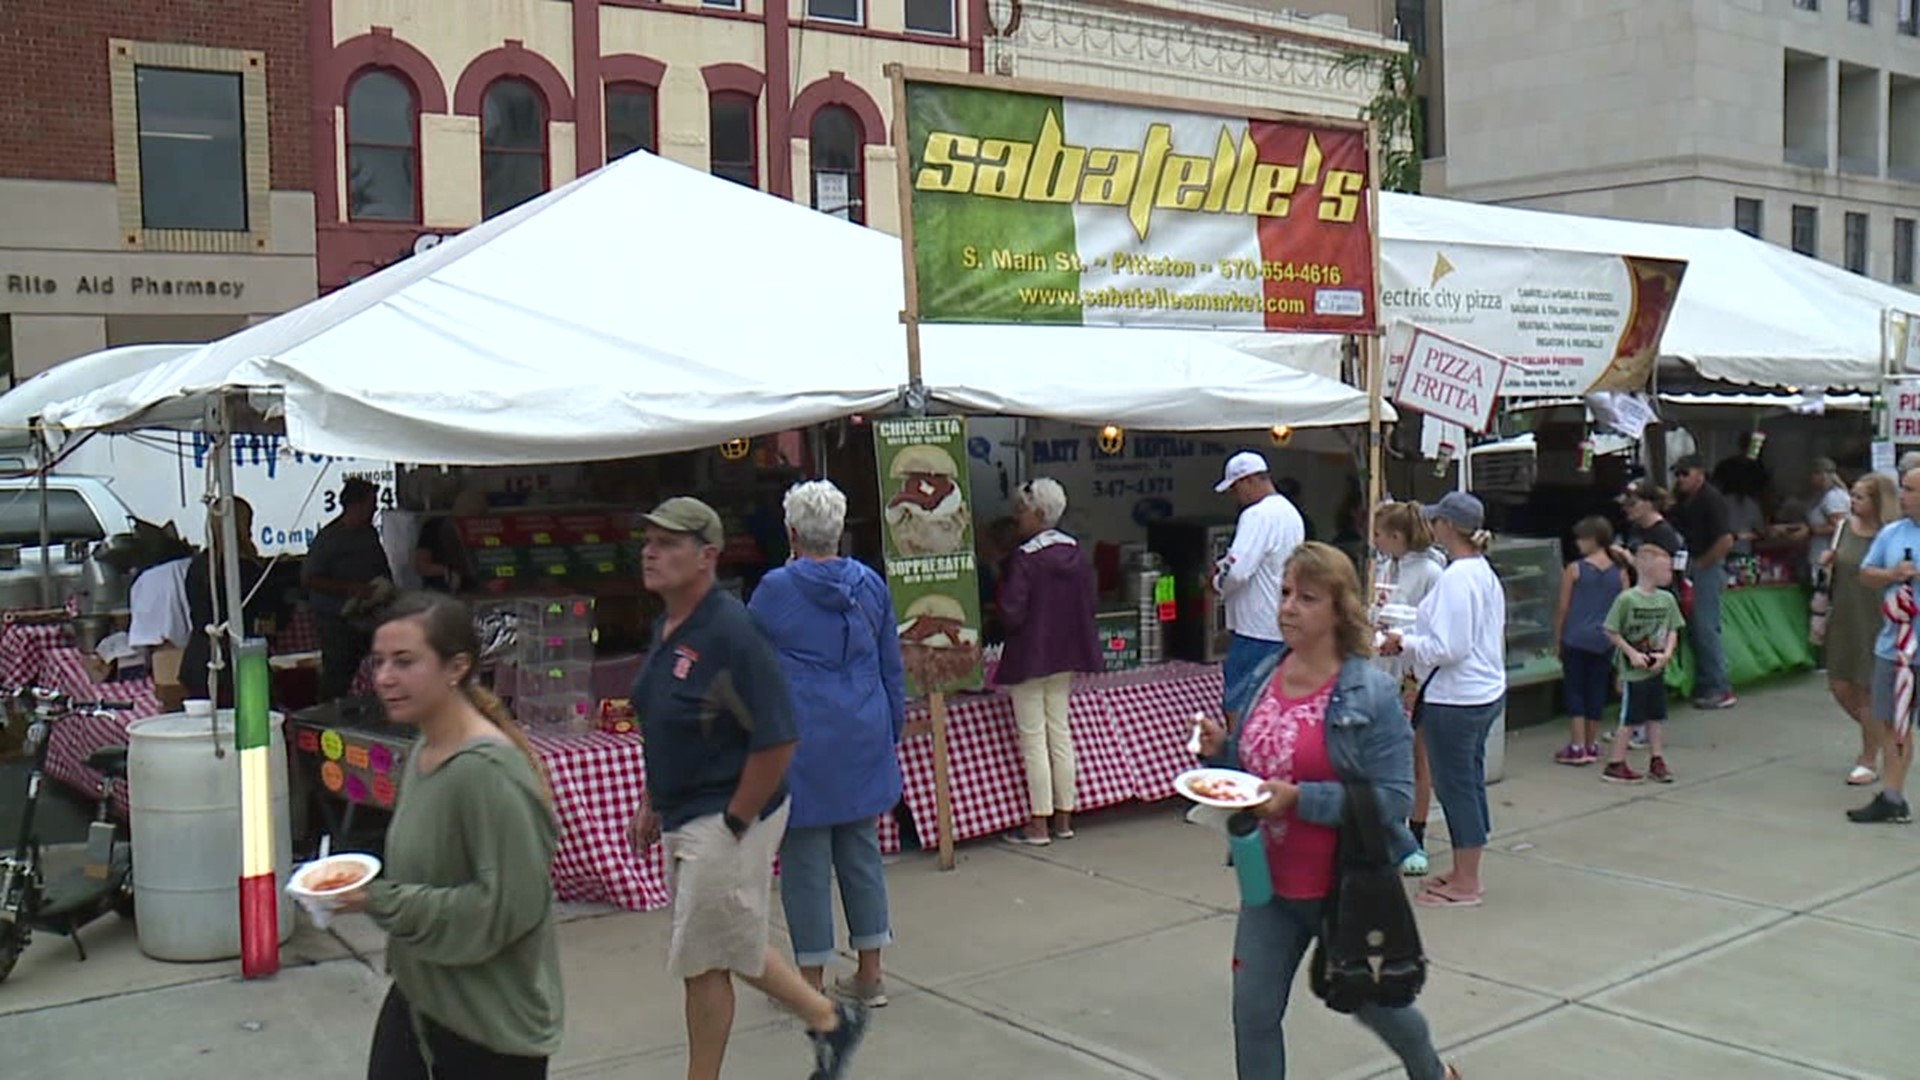 The festival of Italian-American food and culture is planned for Labor Day weekend.